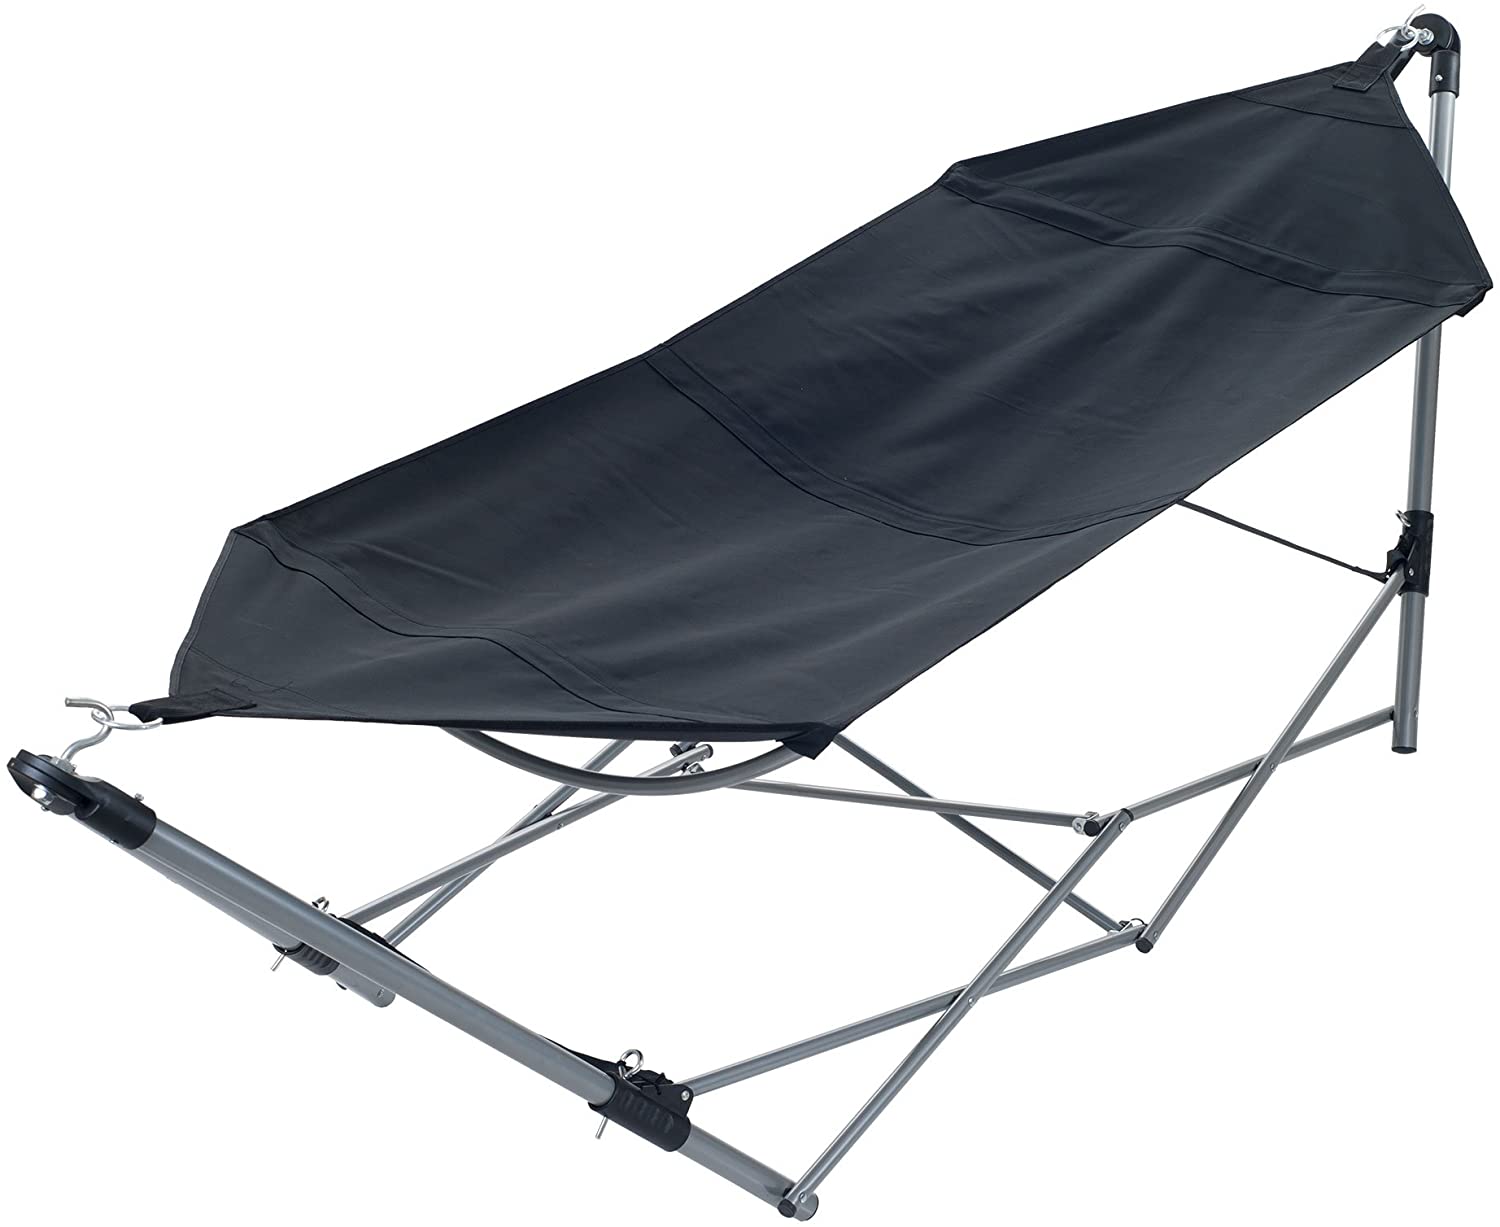 Portable Hammock with Stand by Pure Garden